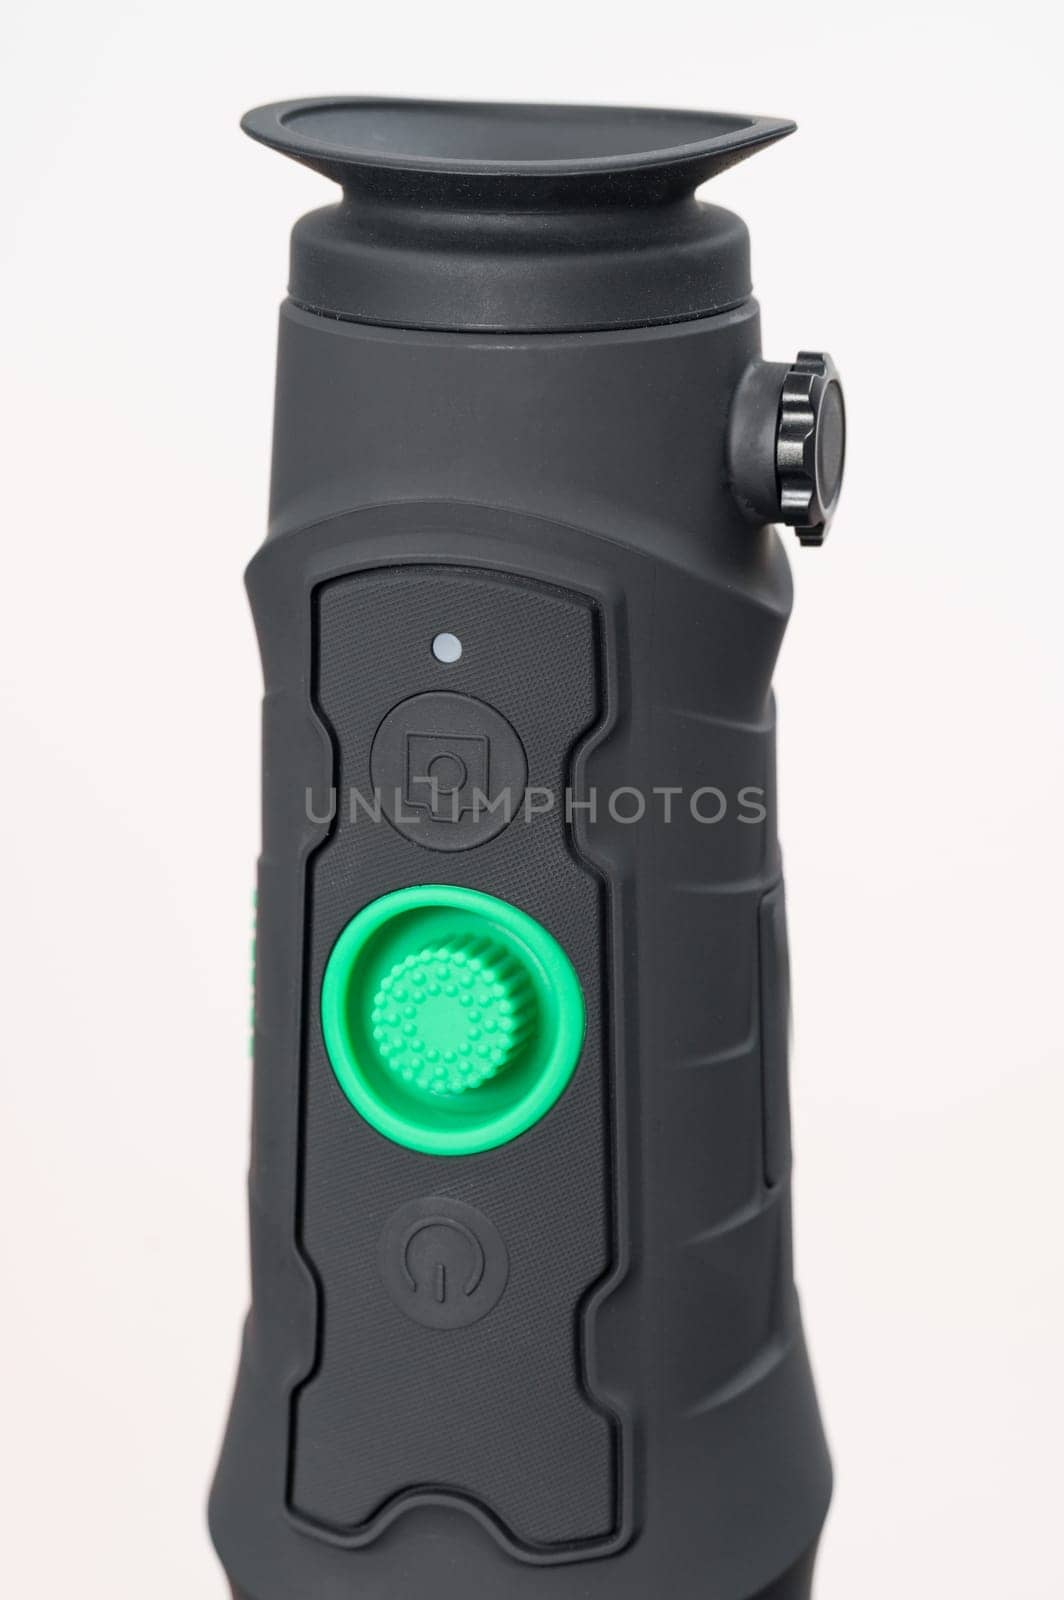 Long-range monocular isolated on white background, rubber body with large green on off button.